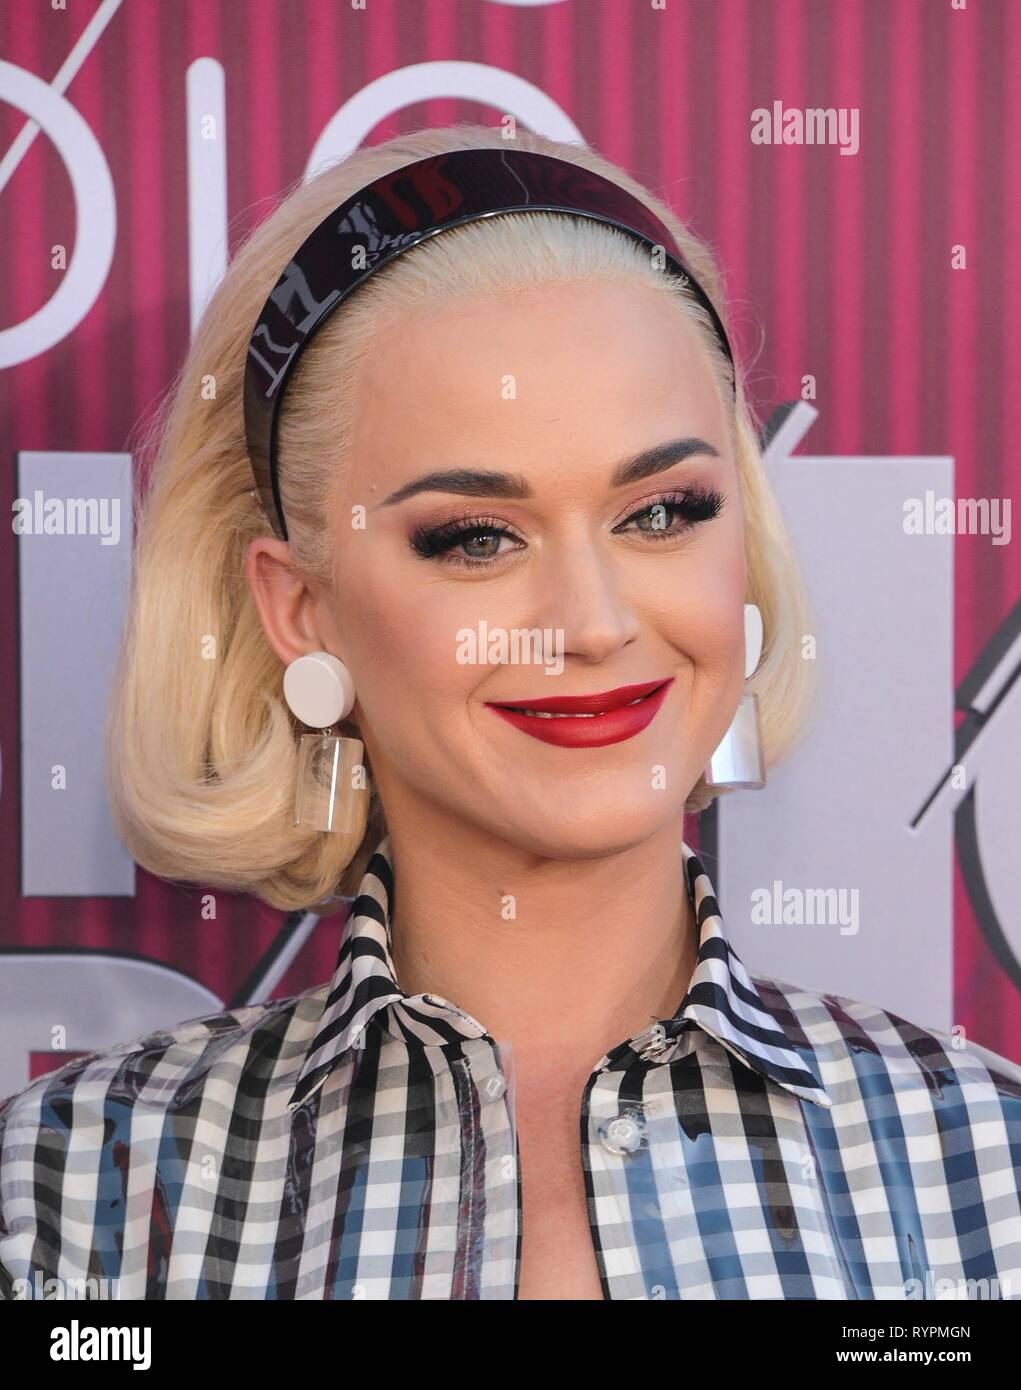 Katy Perry at arrivals for 2019 iHeartRadio Music Awards, Microsoft Theater, Los Angeles, CA March 14, 2019. Photo By: Elizabeth Goodenough/Everett Collection Stock Photo